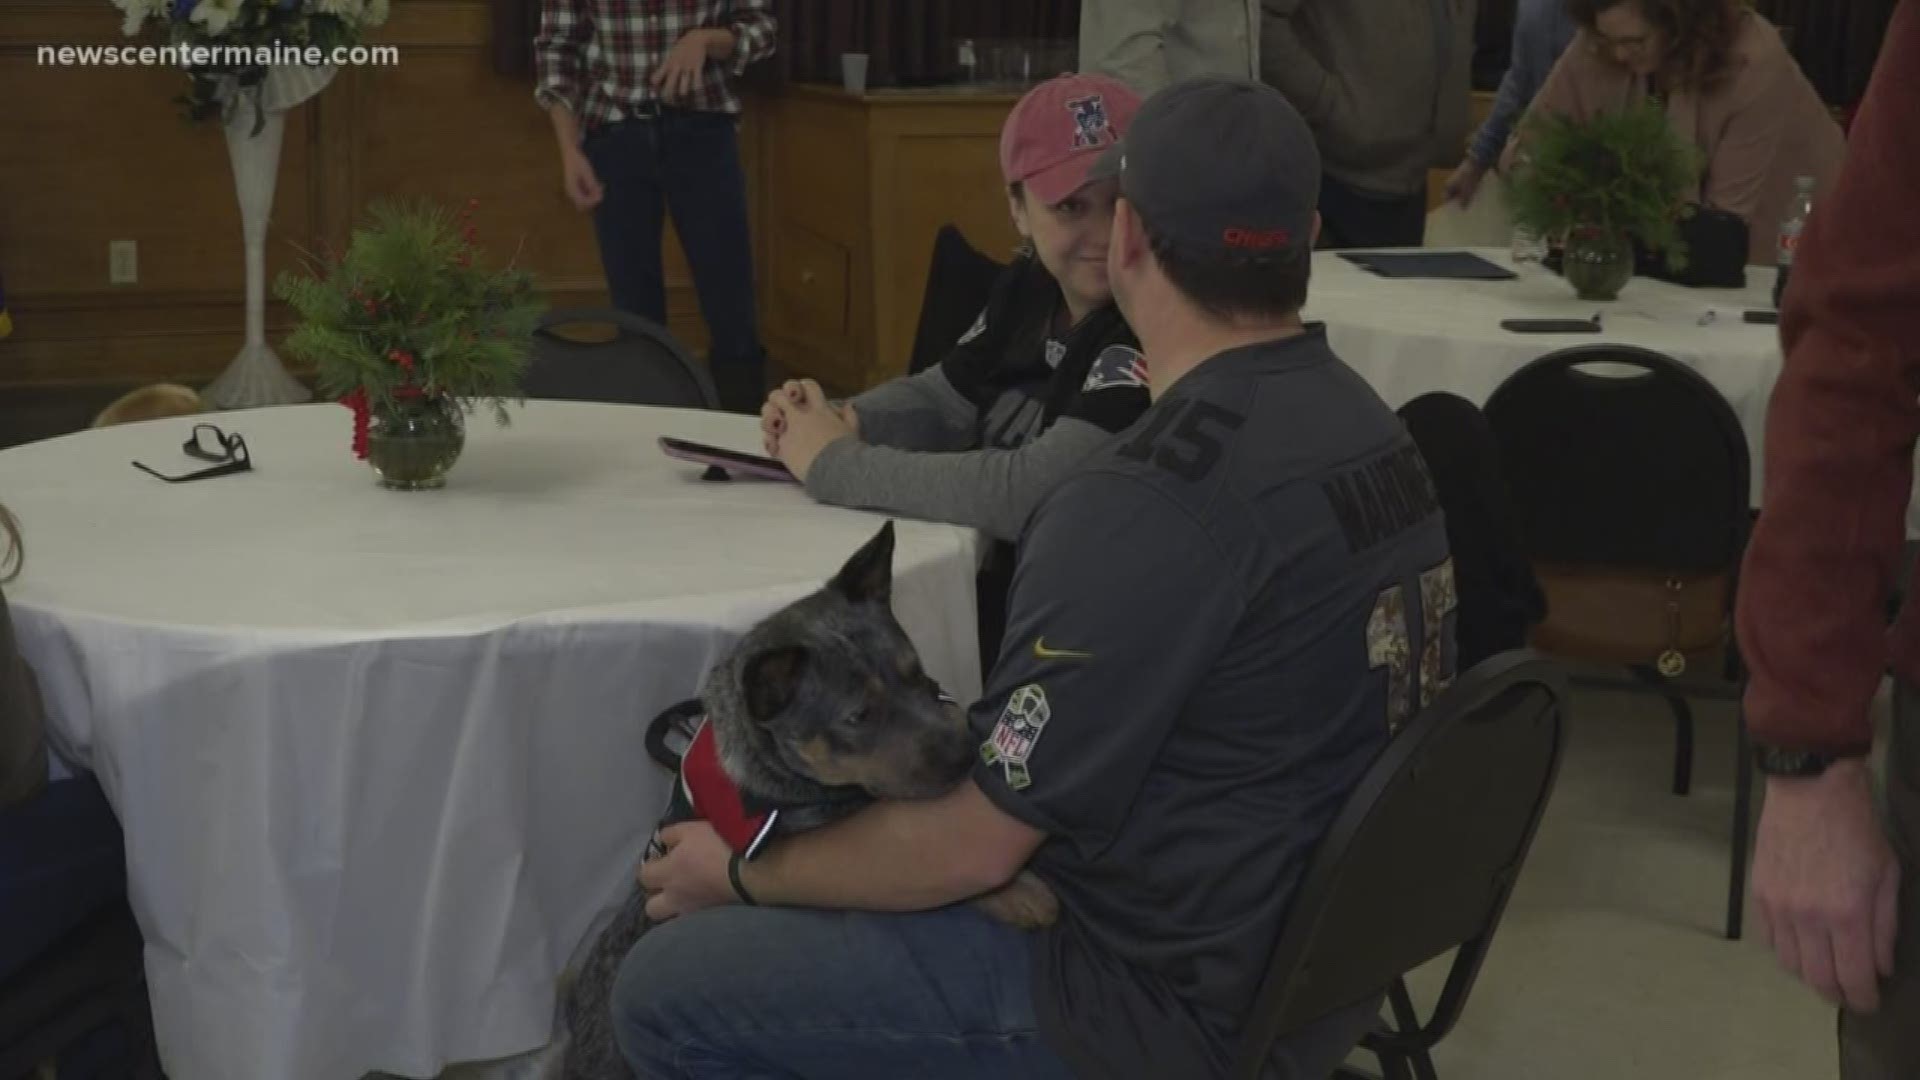 'K9's on the front line' is a Maine based non-profit providing service dogs to military veterans who are struggling.